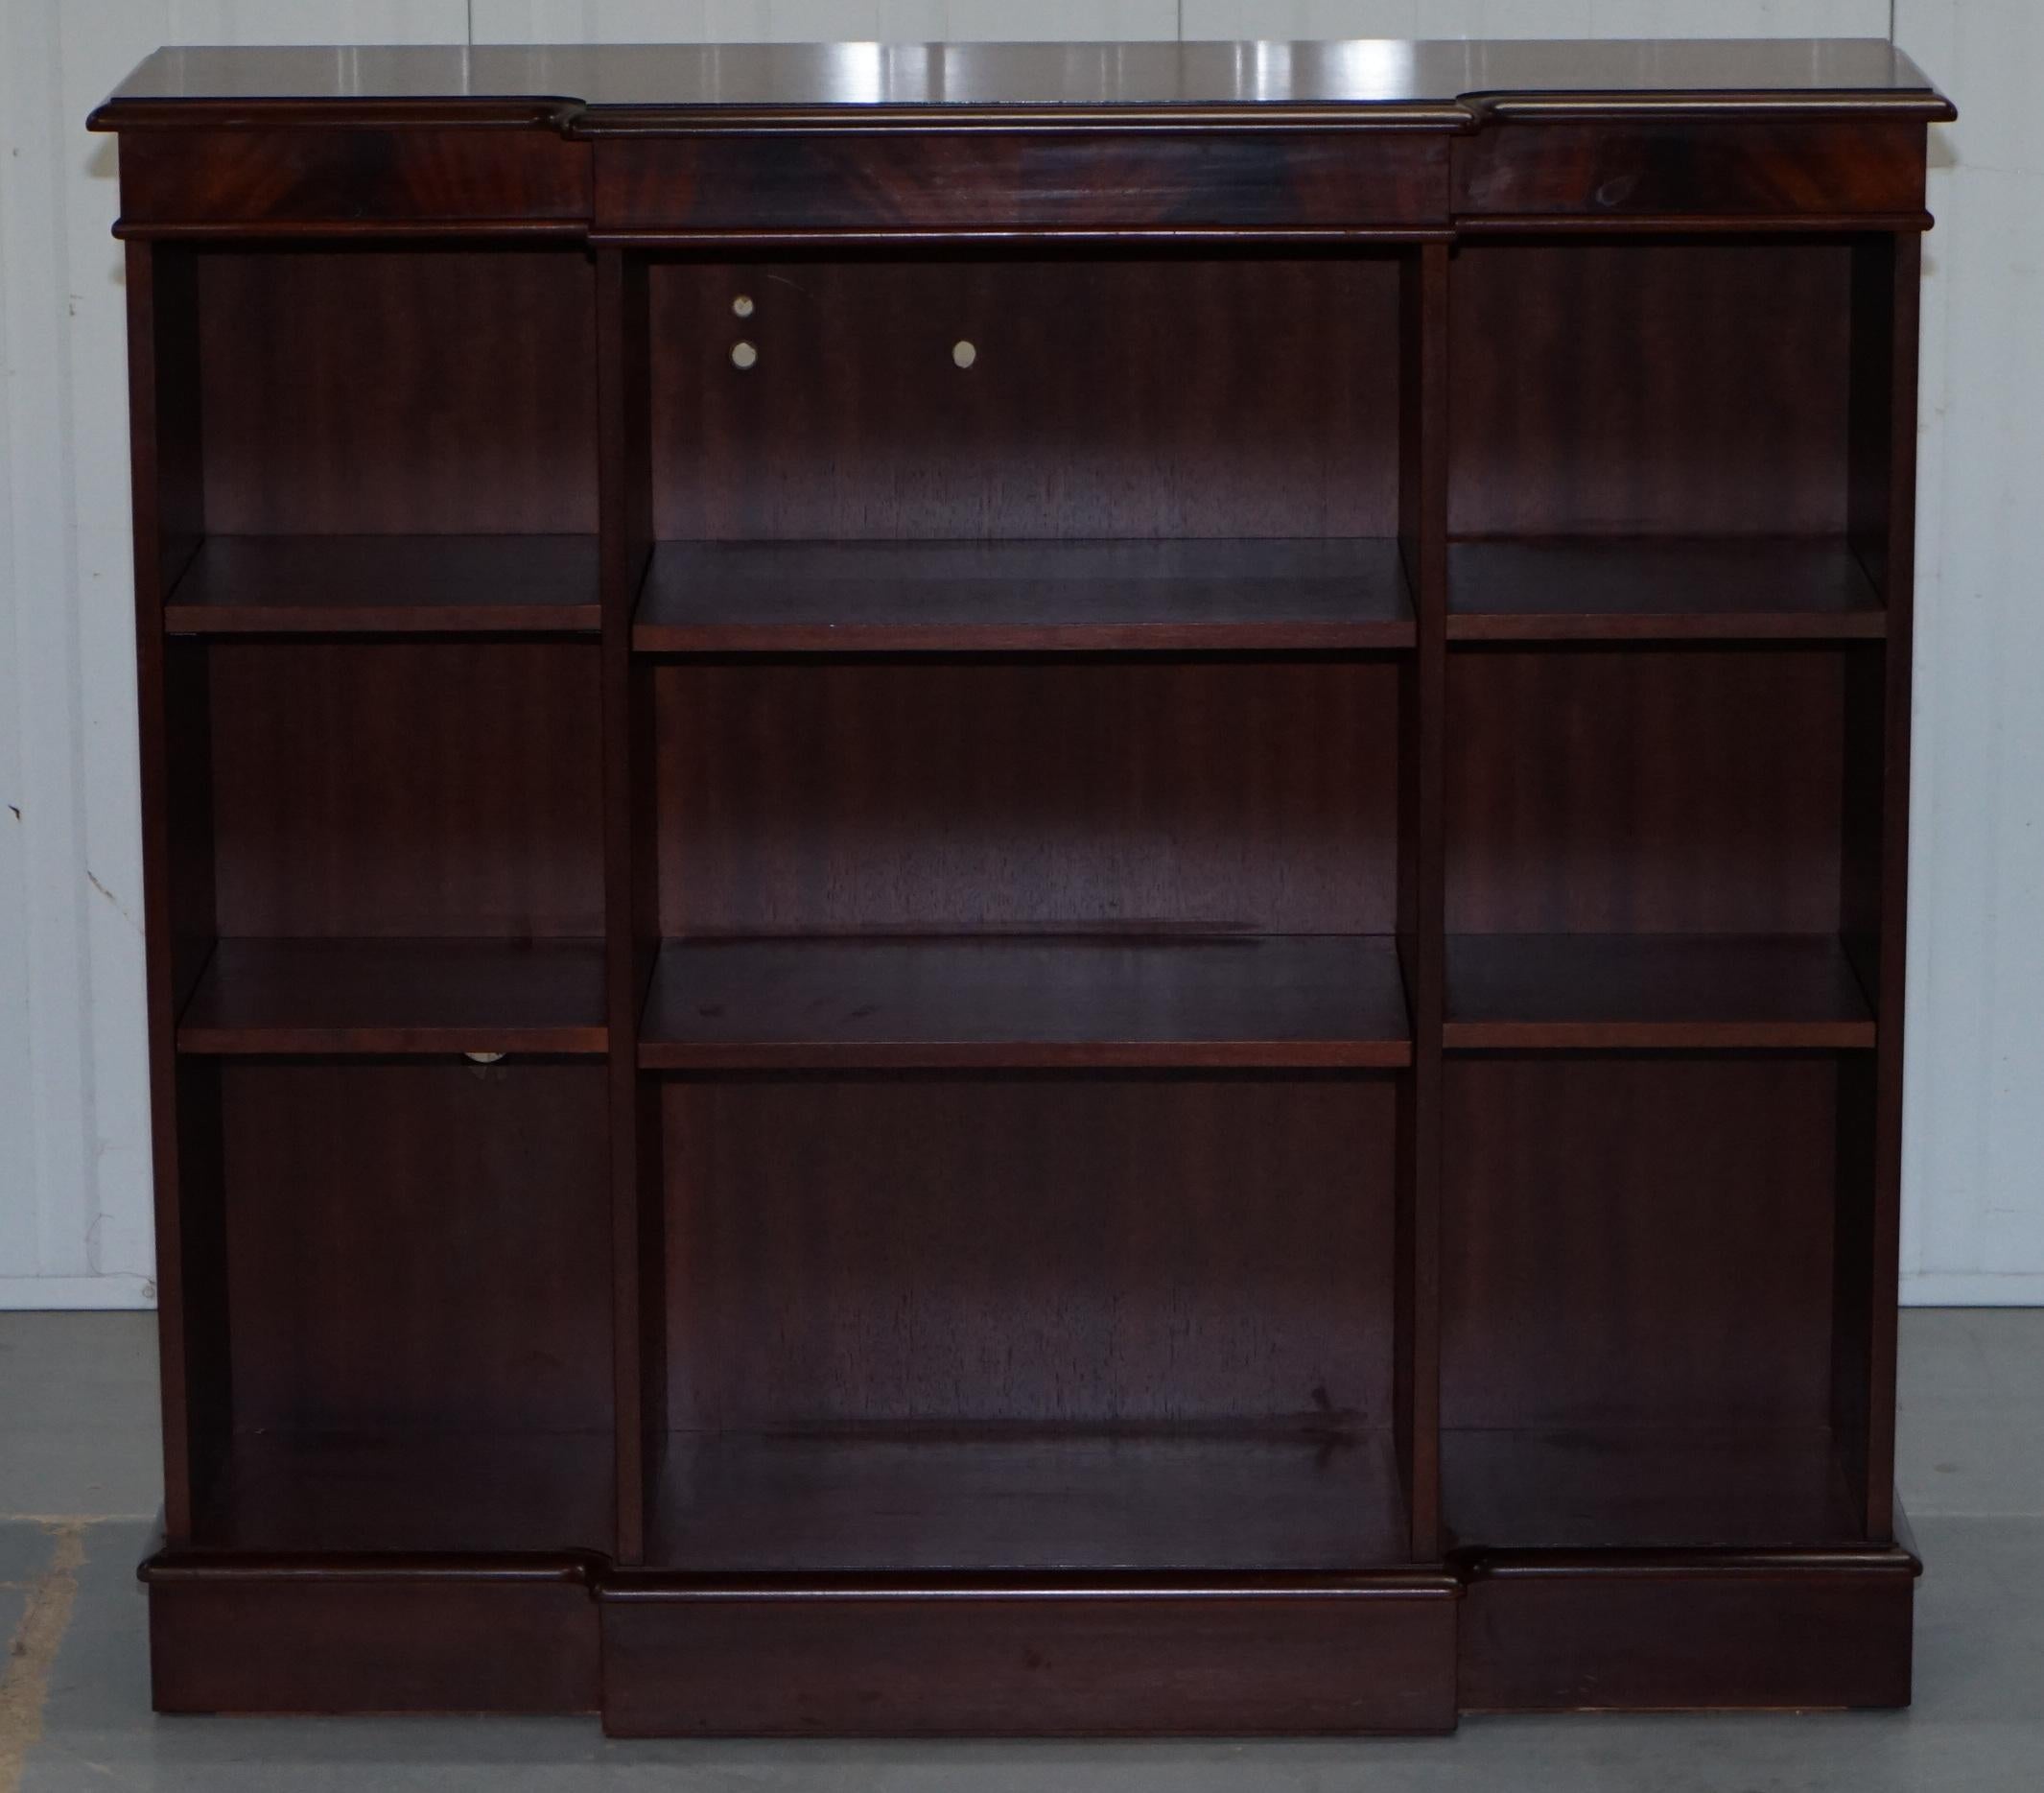 We are delighted to offer for sale this nice vintage breakfront Library Mahogany dwarf open bookcase with height adjustable shelves

A good practical library open bookcase, ideal for small to medium spaces and with a nice top section for